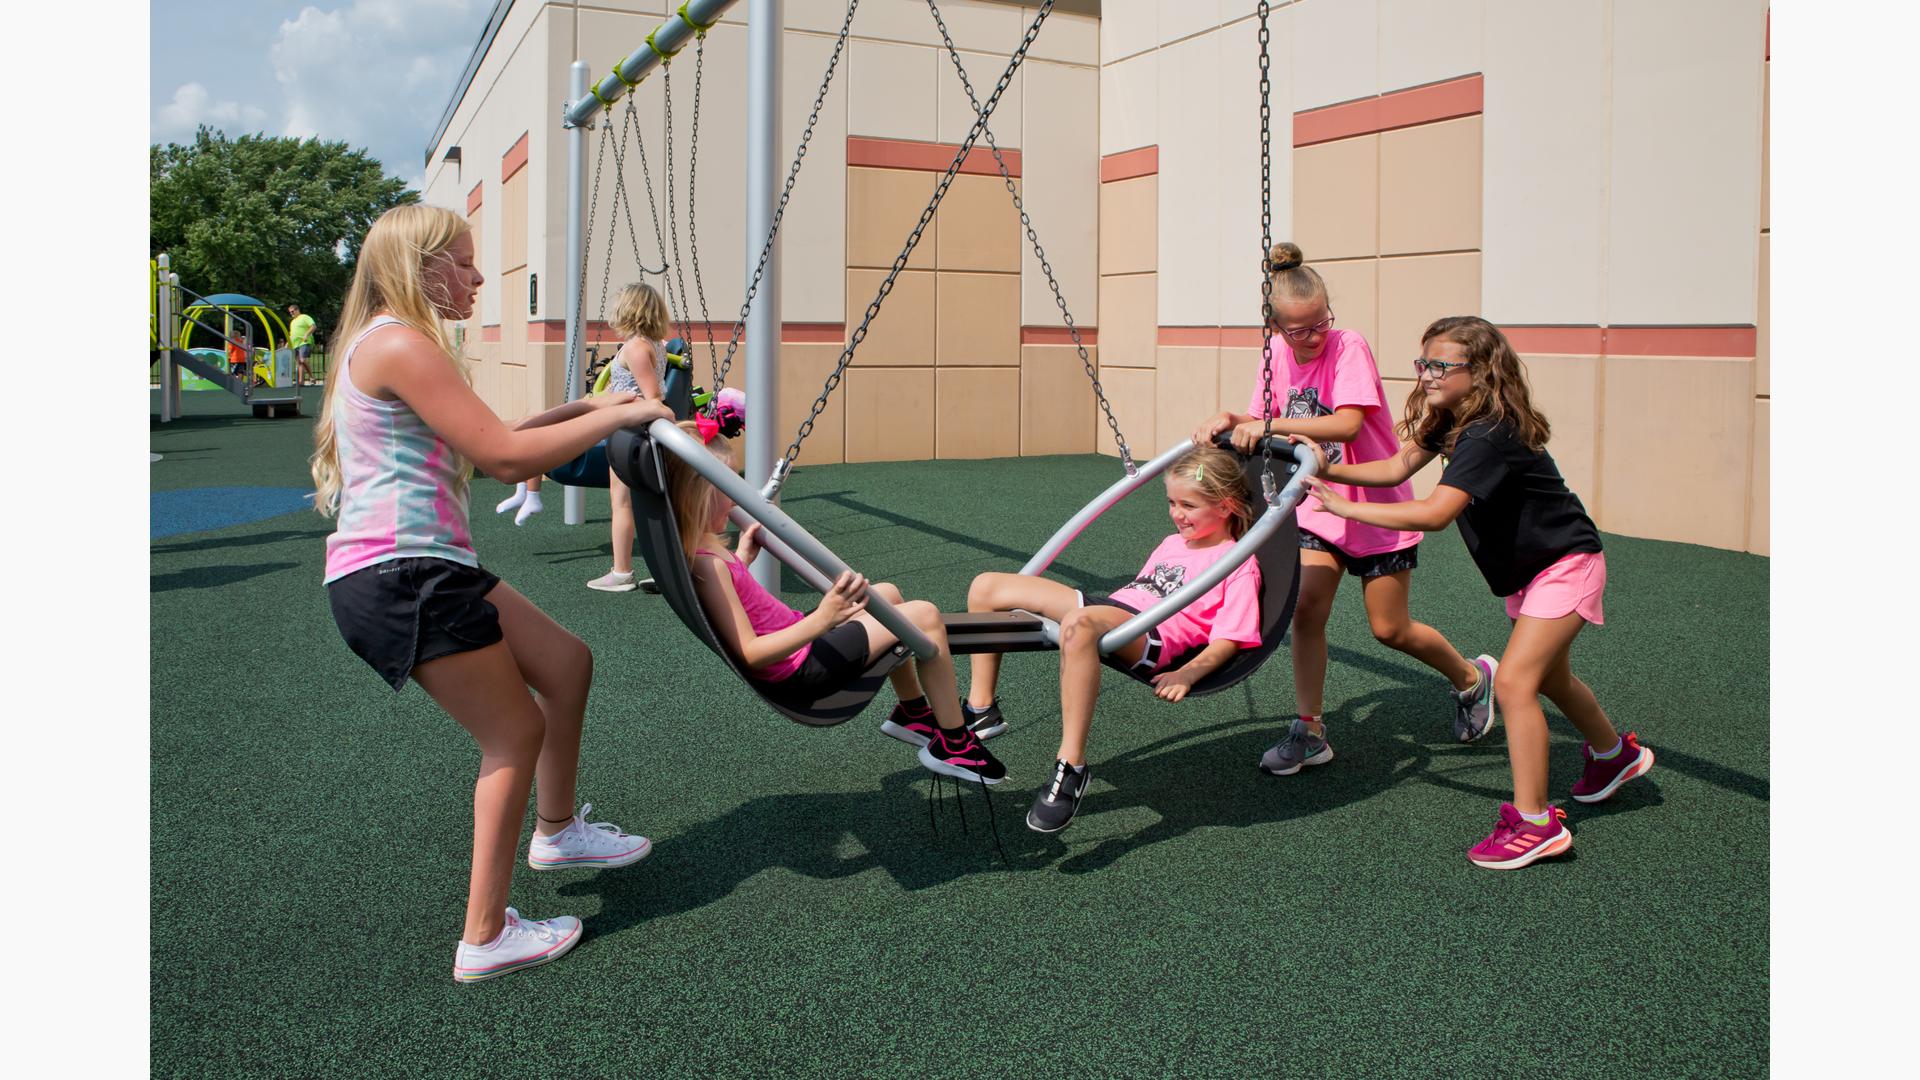 Grils playing on We-Go-Round® with DigiFuse® Panels